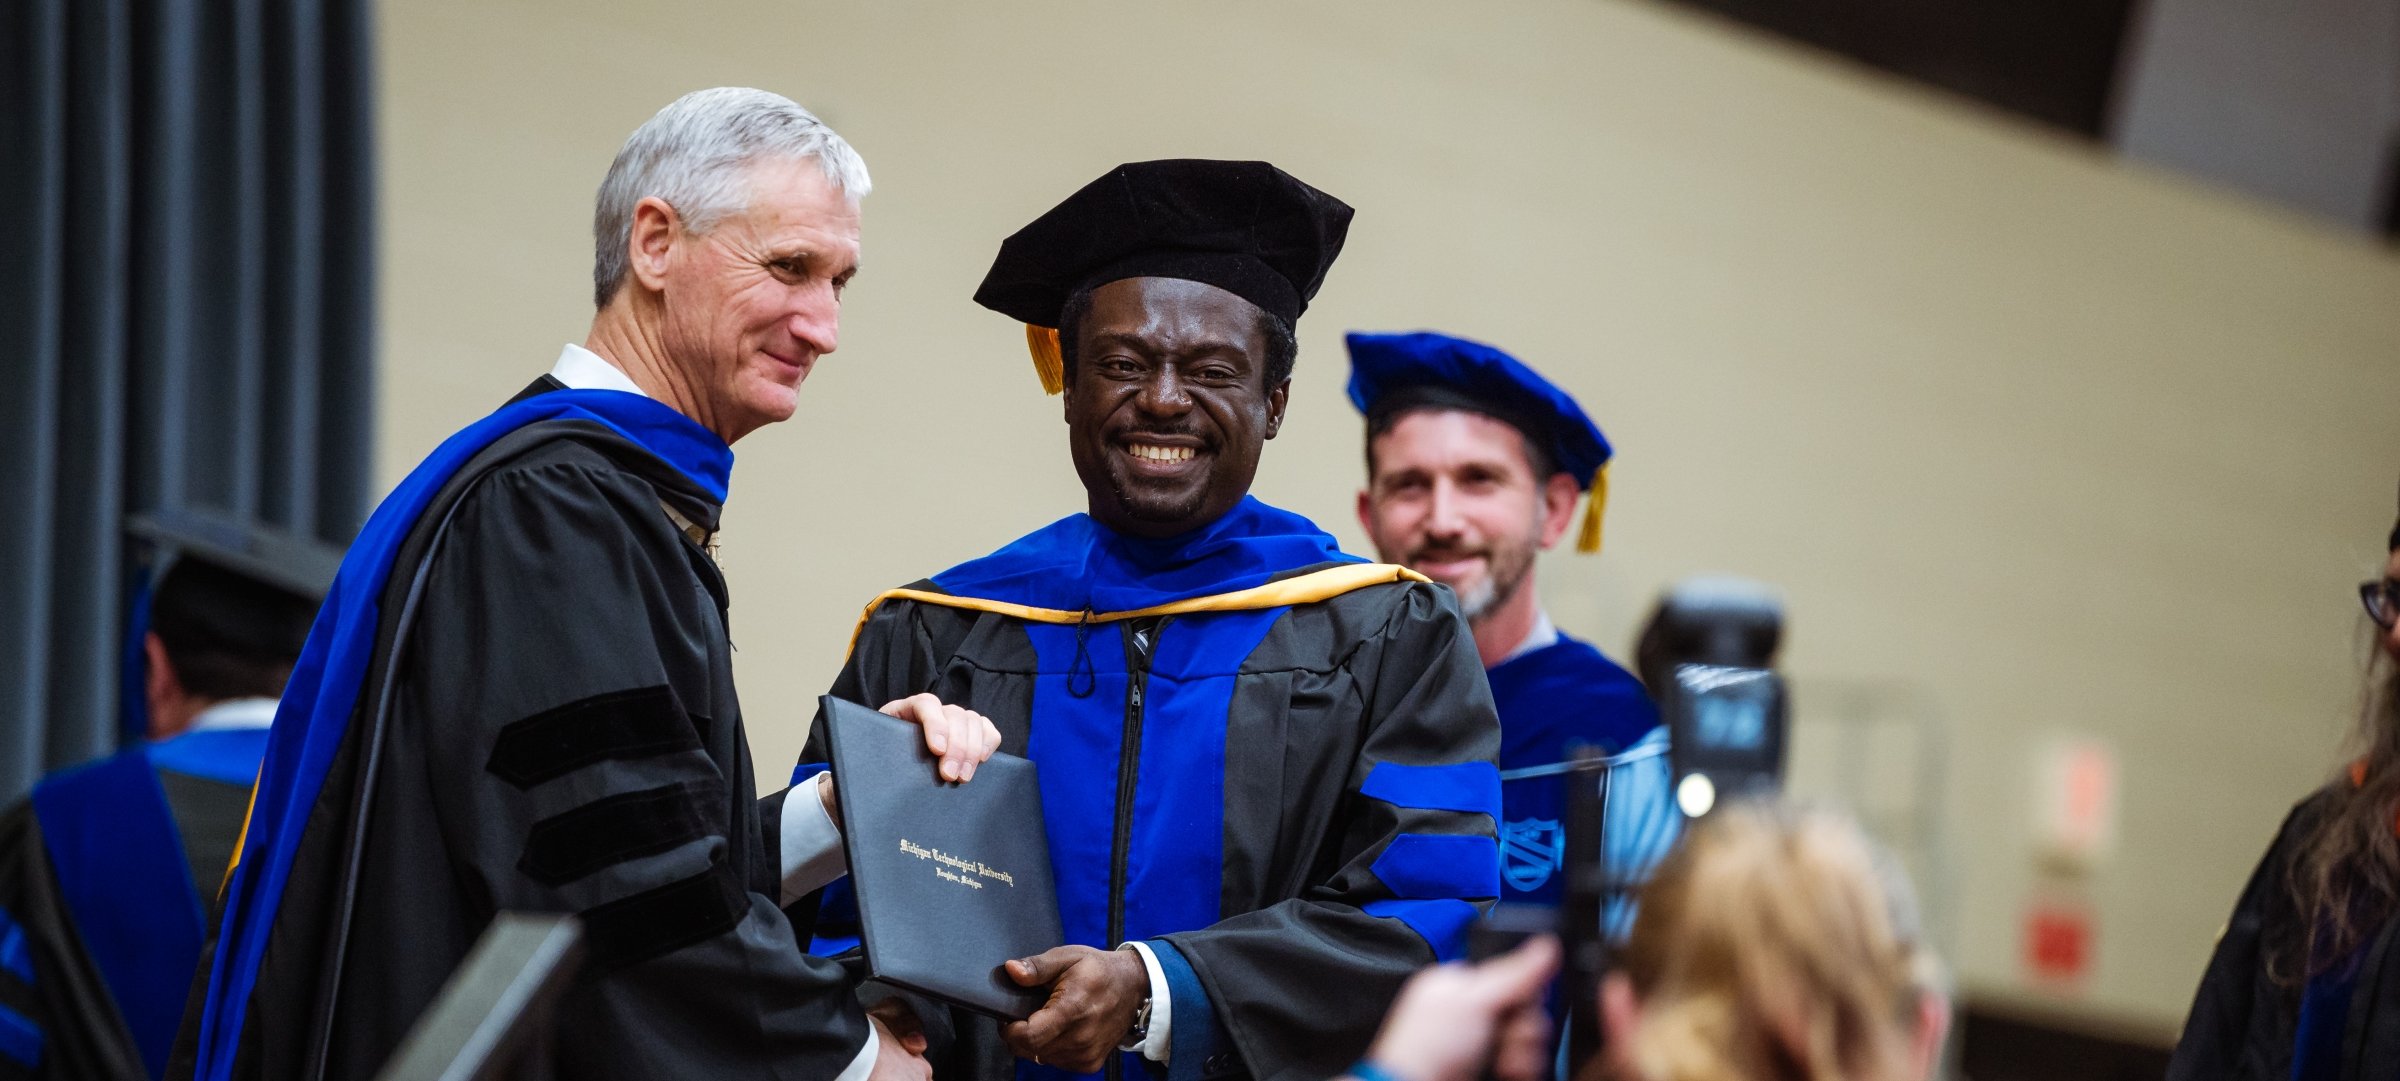 President Koubek and graduate student holding degree smiling for the camera.